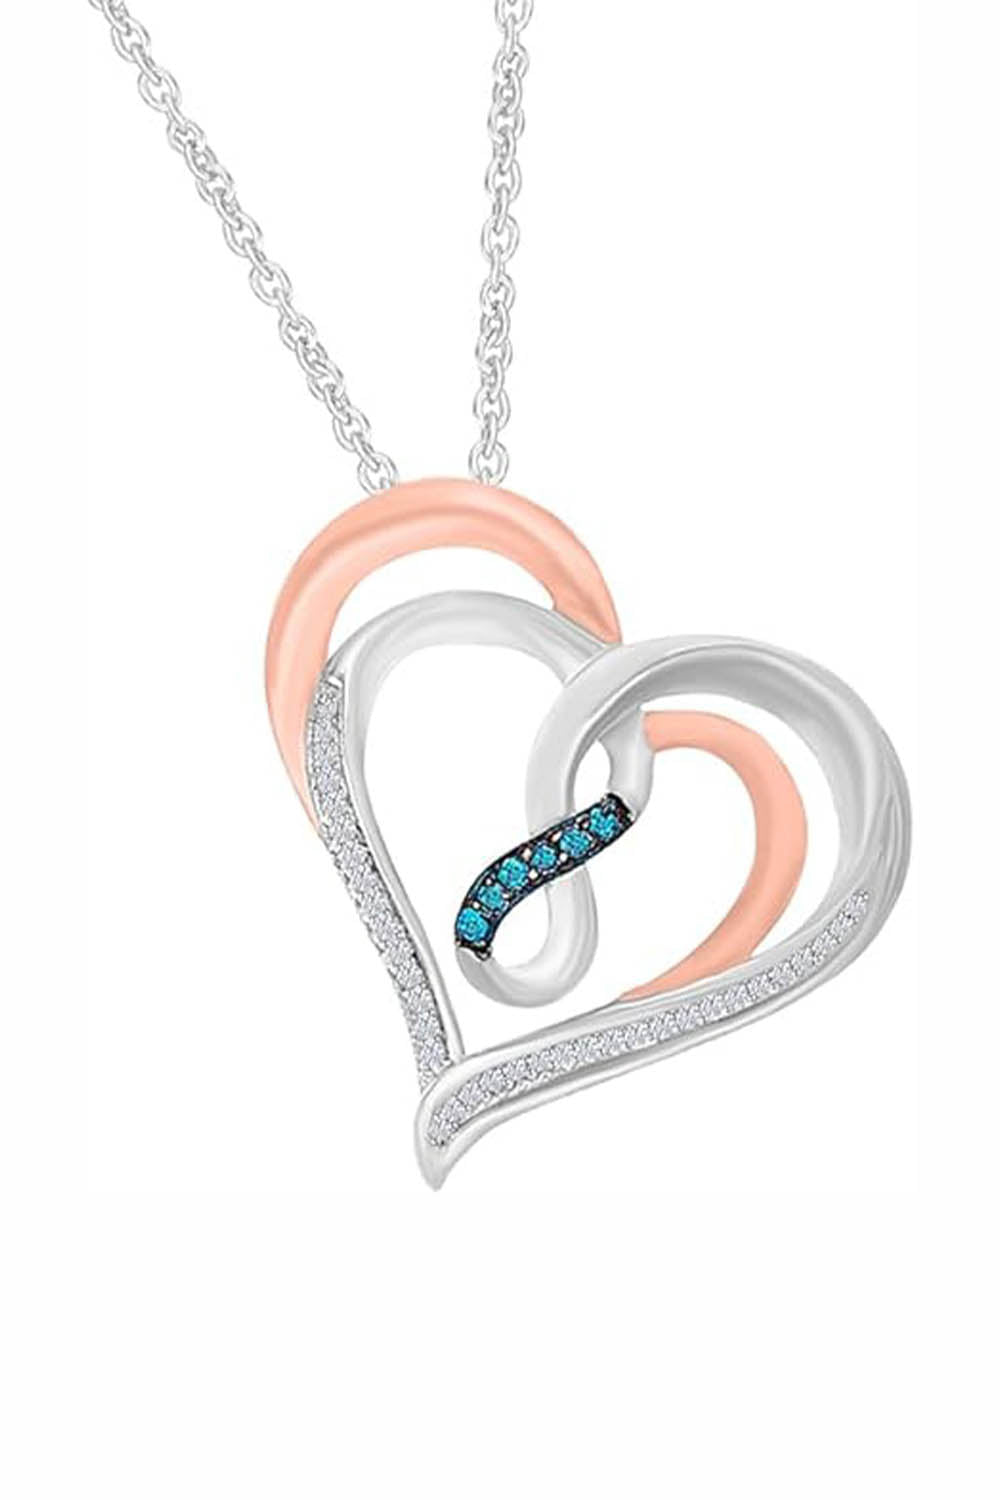 Rose Gold Color Yaathi Blue and White Infinity Heart Pendant Necklace 